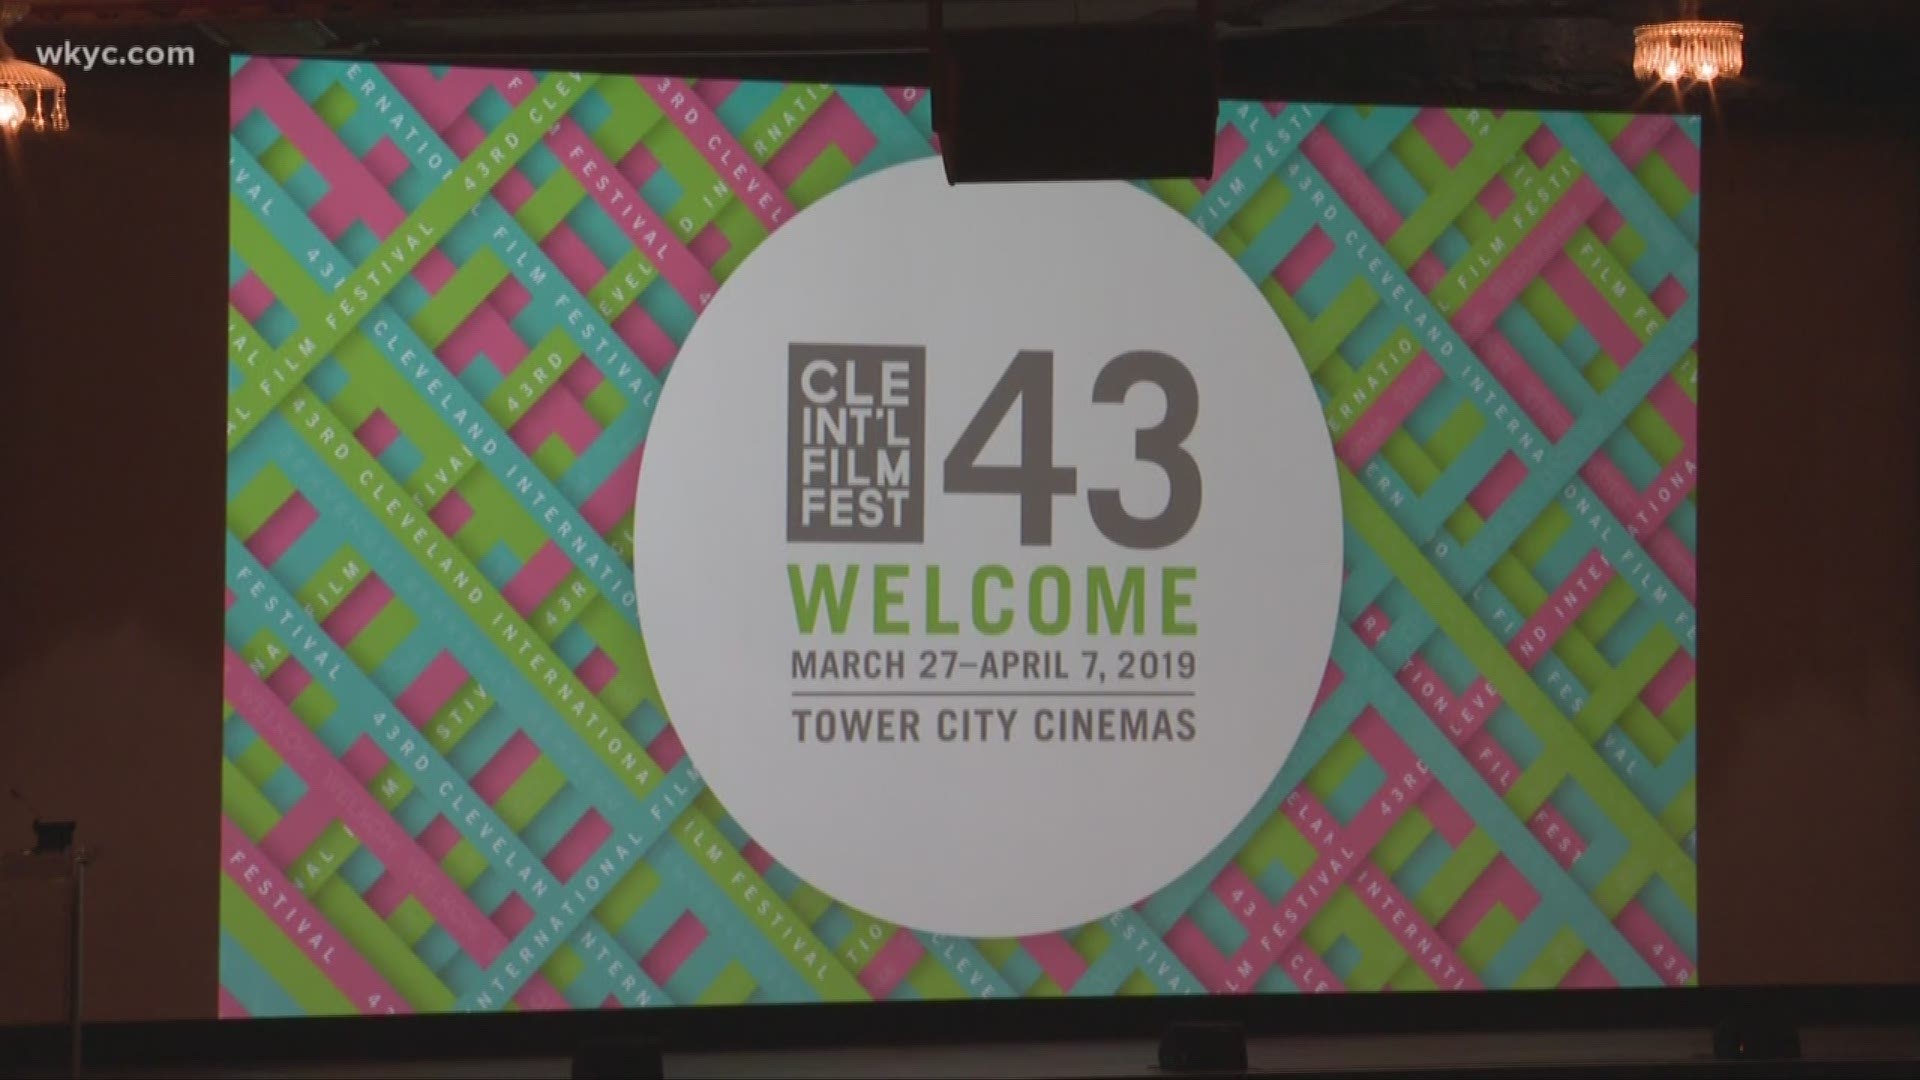 Opening night of the 43rd Cleveland International Film Festival